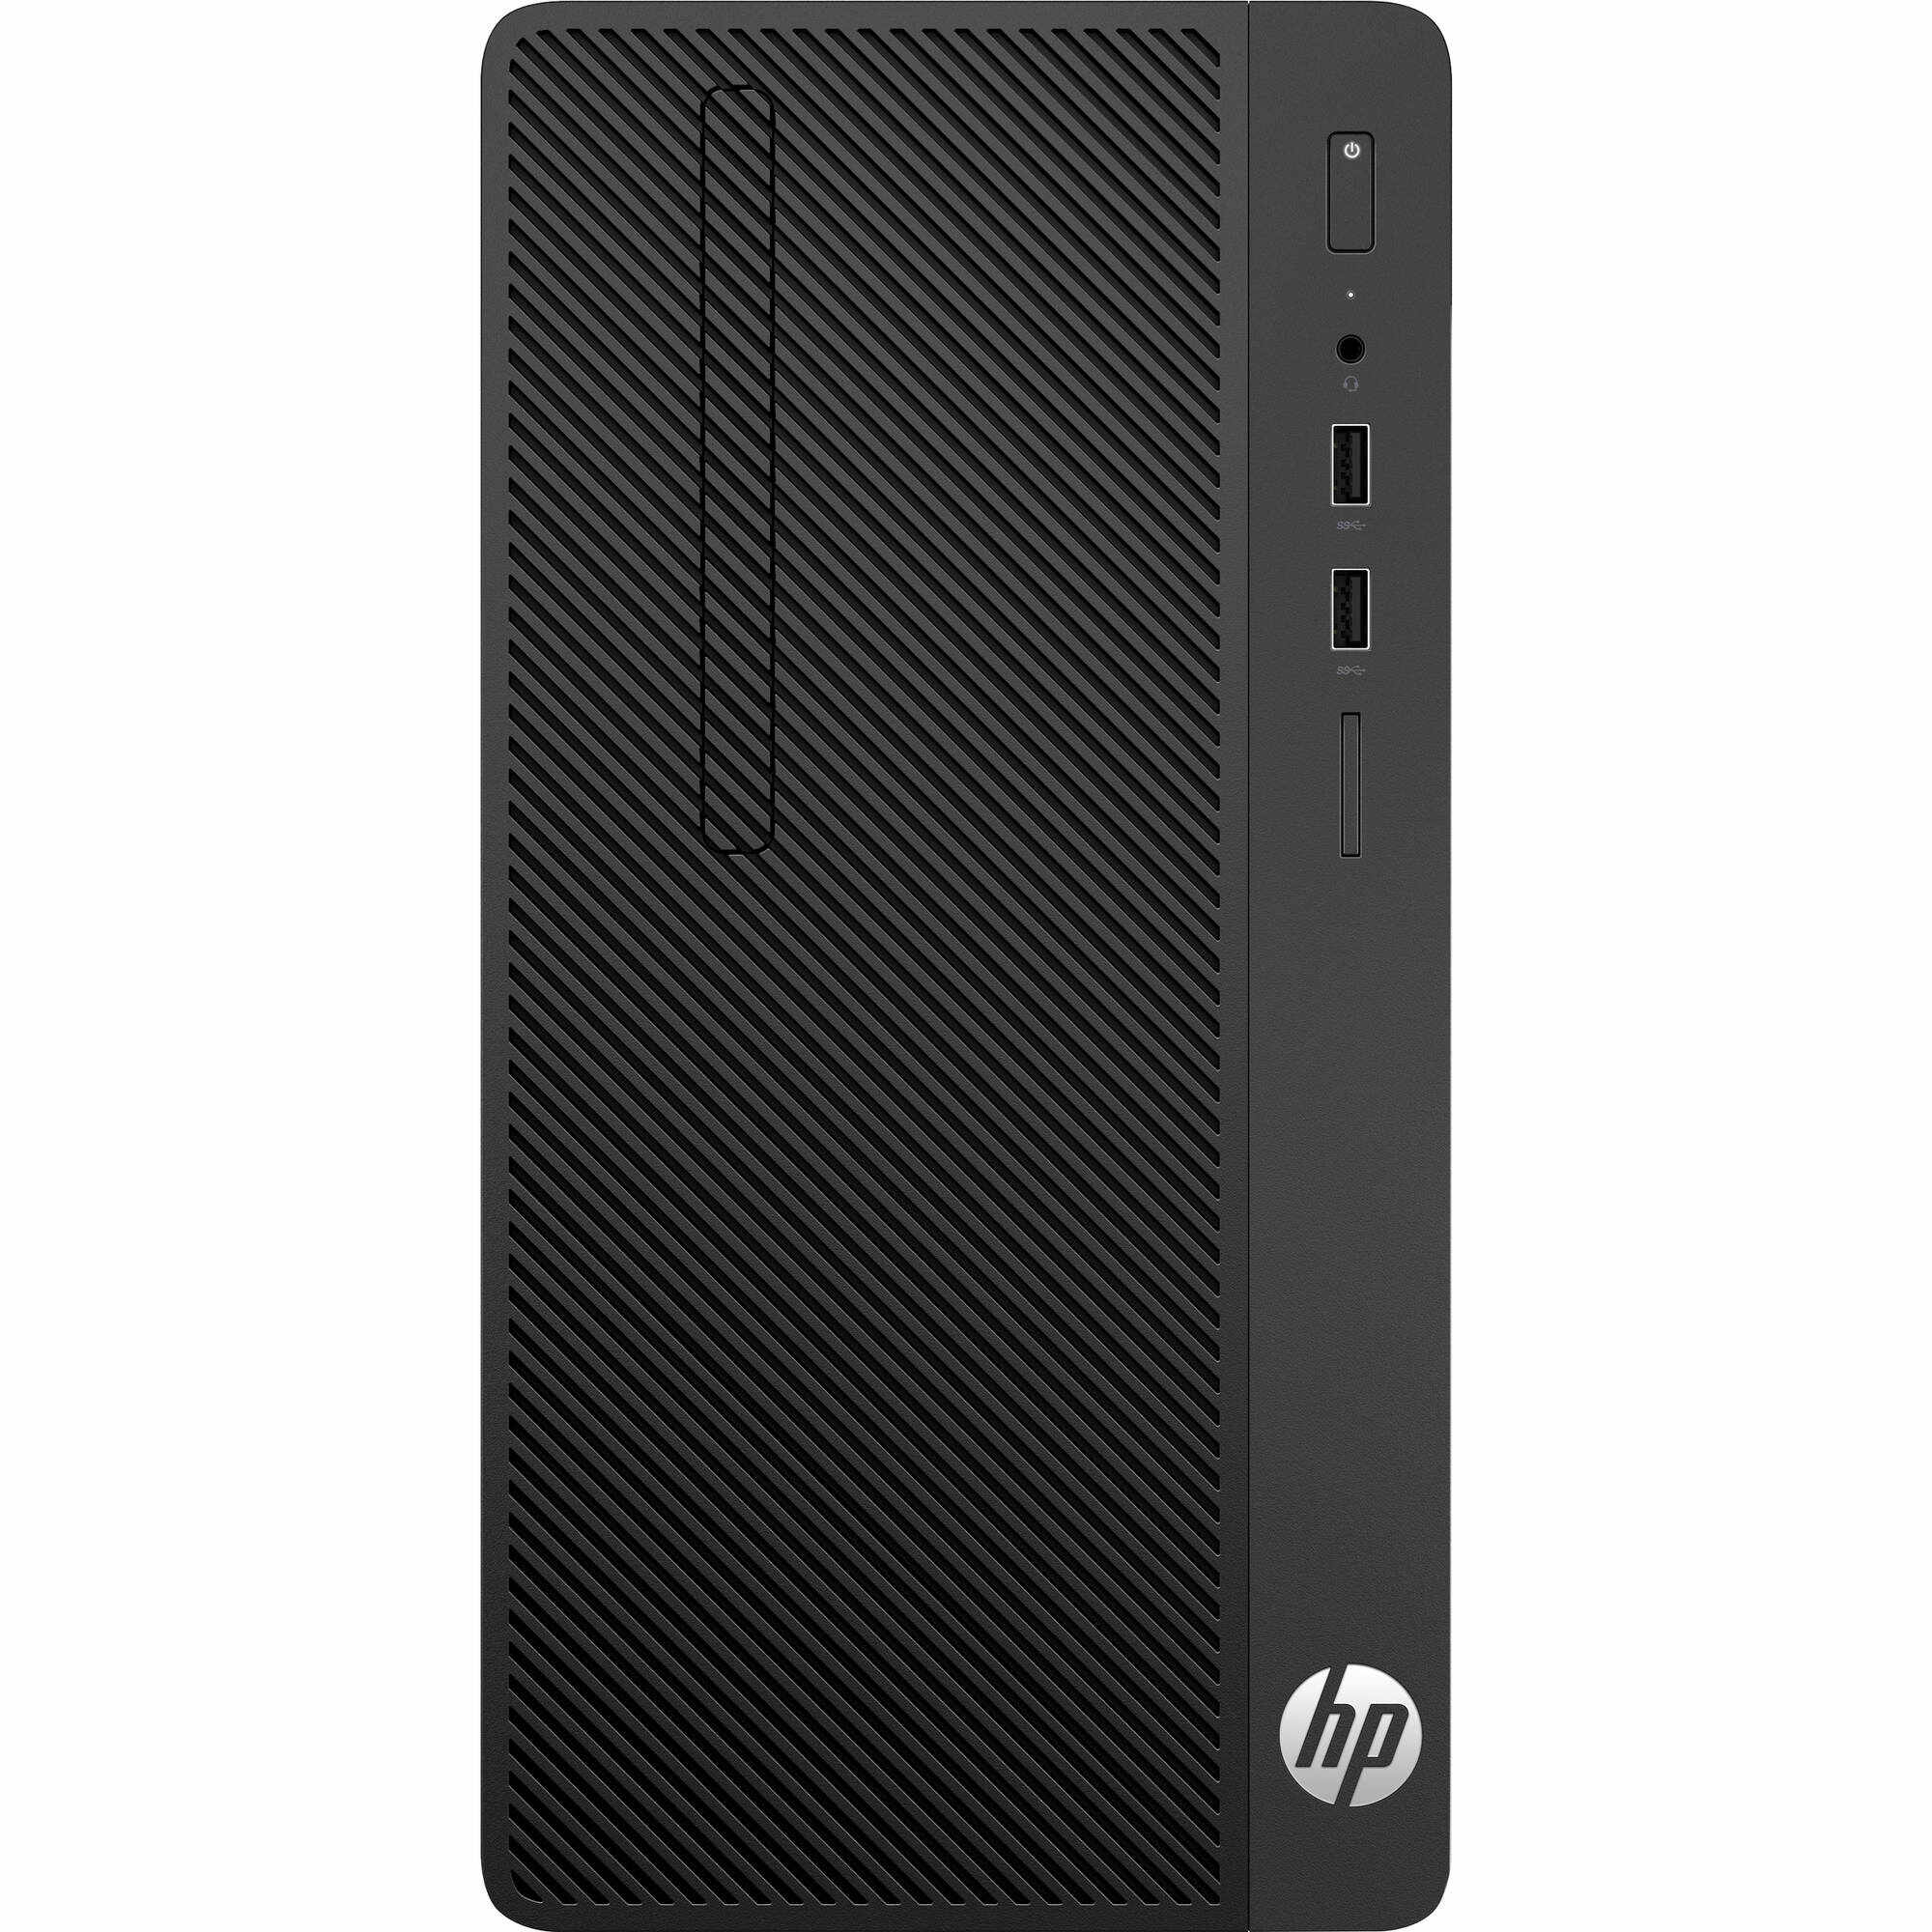 PC Second Hand HP 290 G2 Tower, Intel Core i5-8400 2.80-4.00GHz, 8GB DDR4, 240GB SSD, DVD-ROM